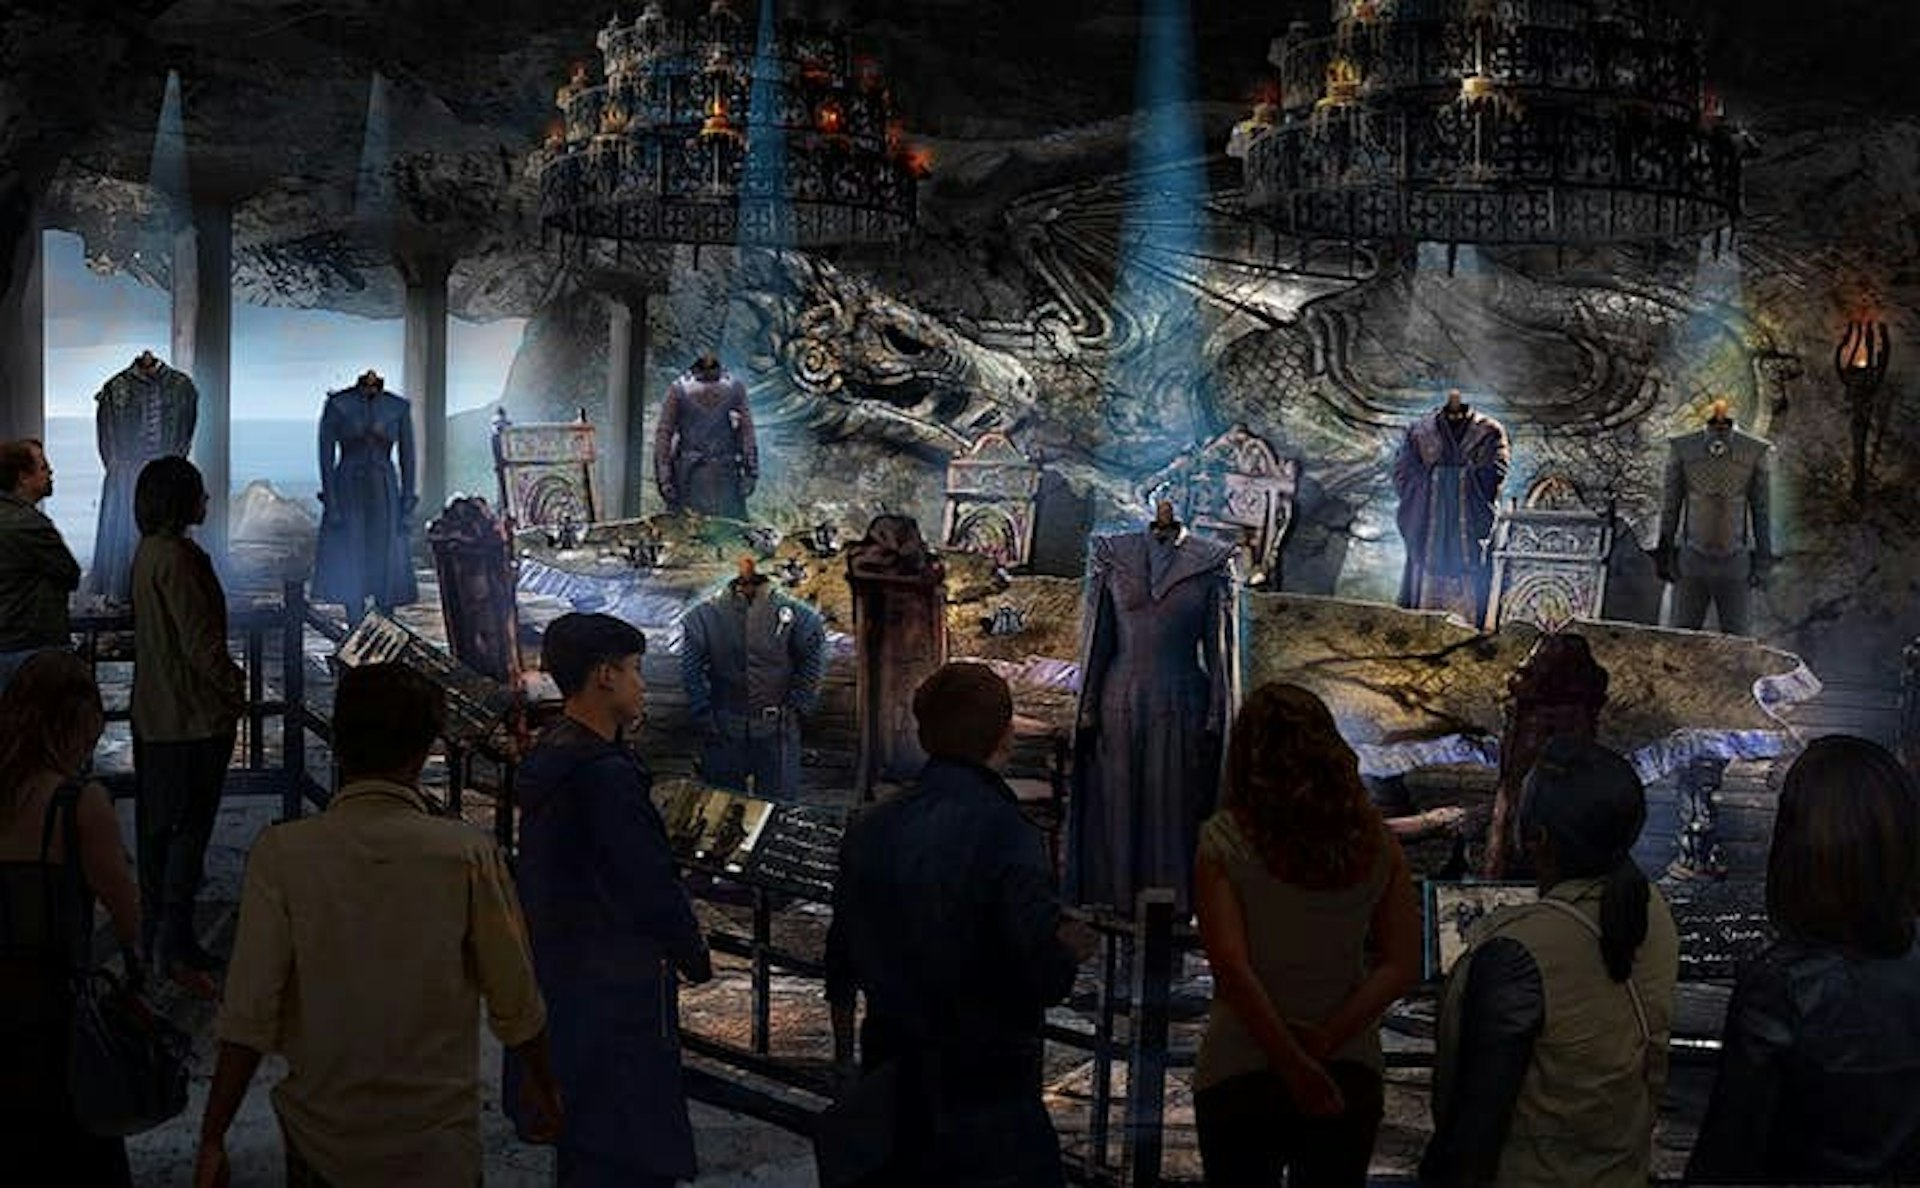 Visitors walking through the displays of original costumes and sets at the Game of Thrones Studio Tour in Northern Ireland